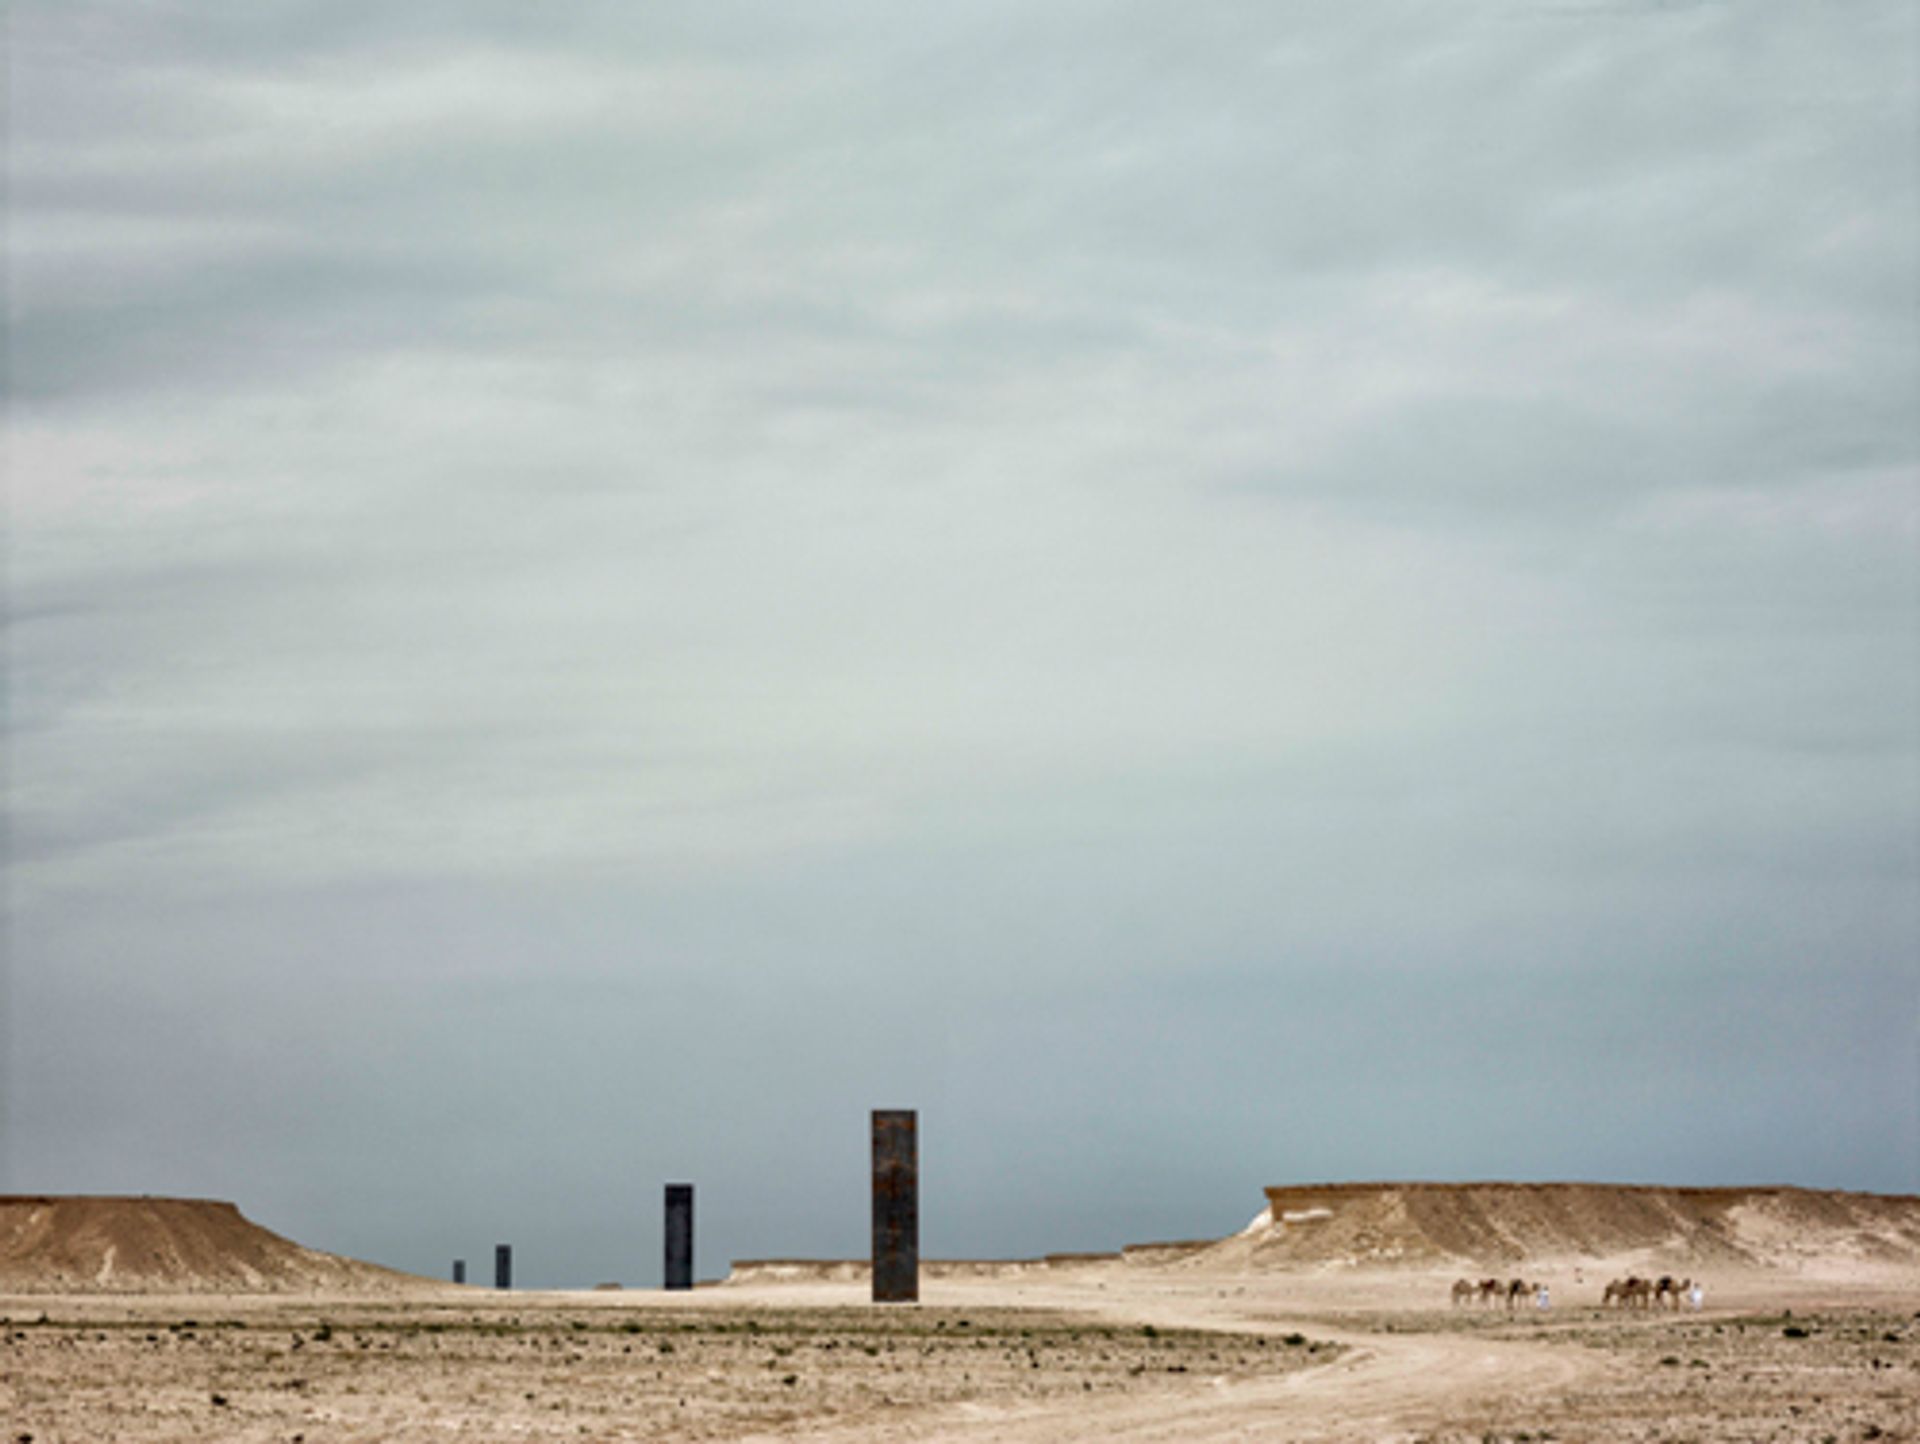 This is not the first time that the Richard Serra's East West/West East (2014) sculpture in Qatar has been vandalised 